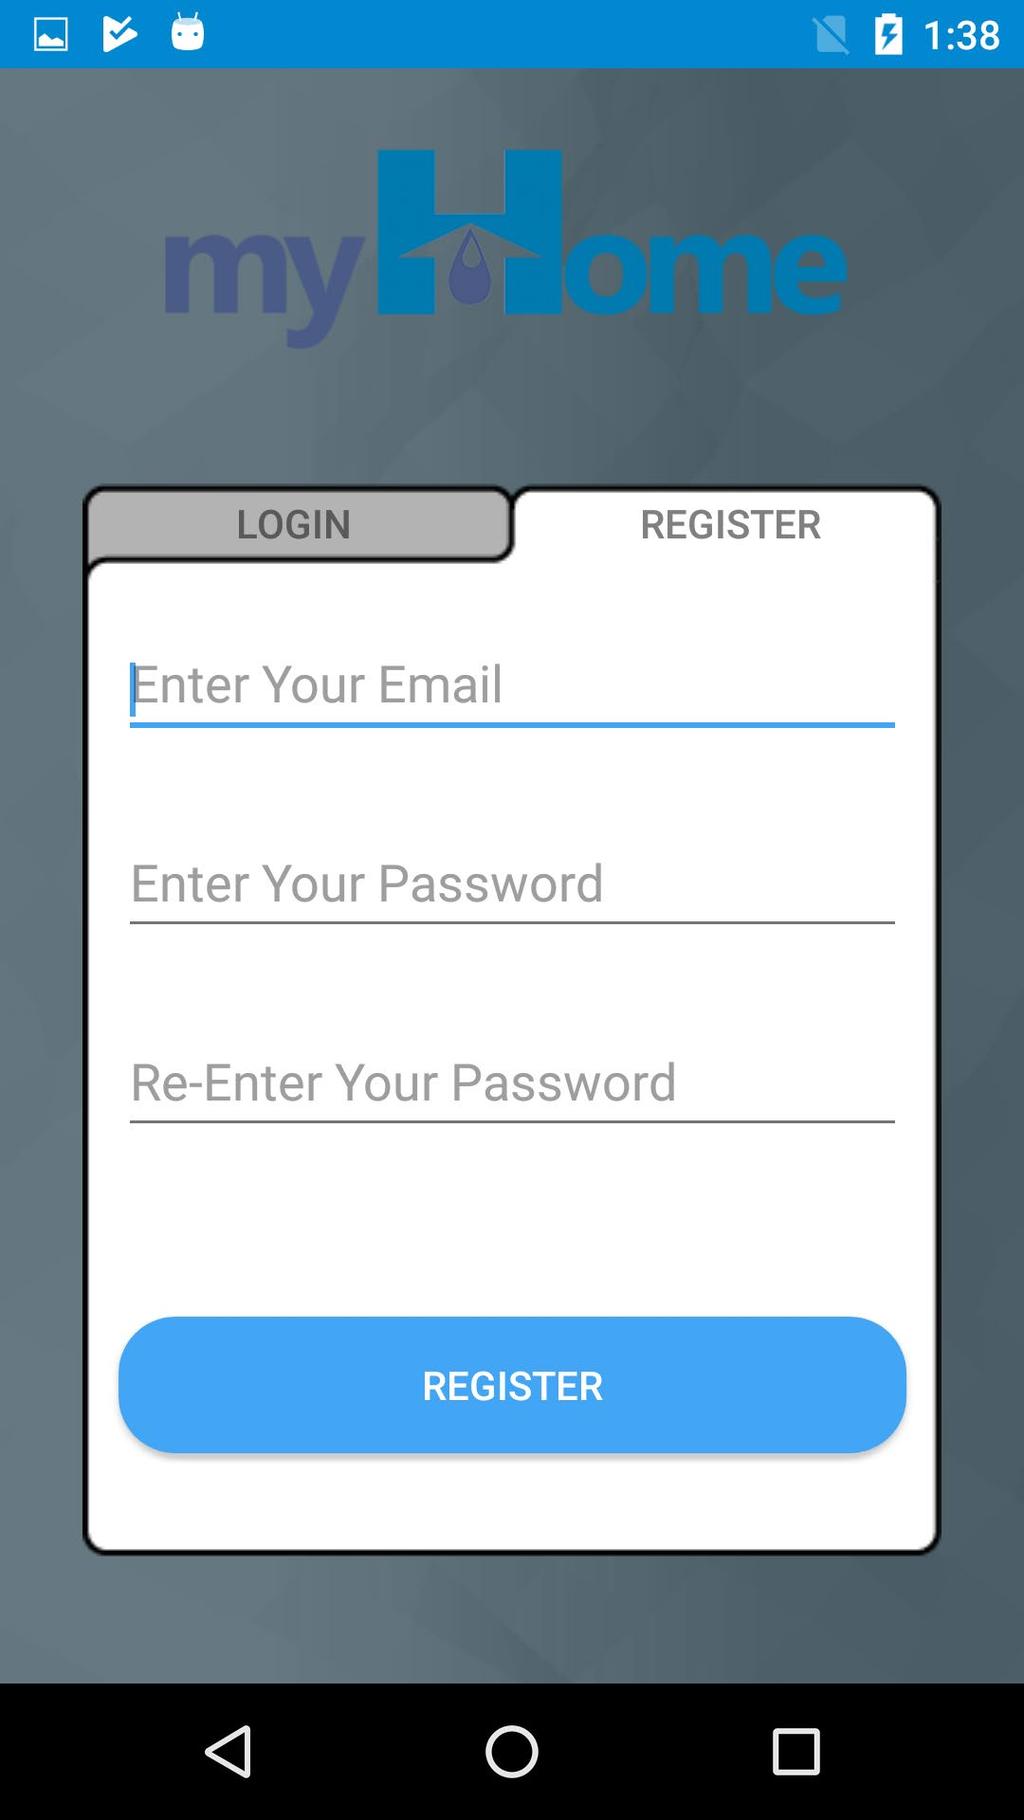 ACCOUNT REGISTER During account Registration, an email will be sent to the